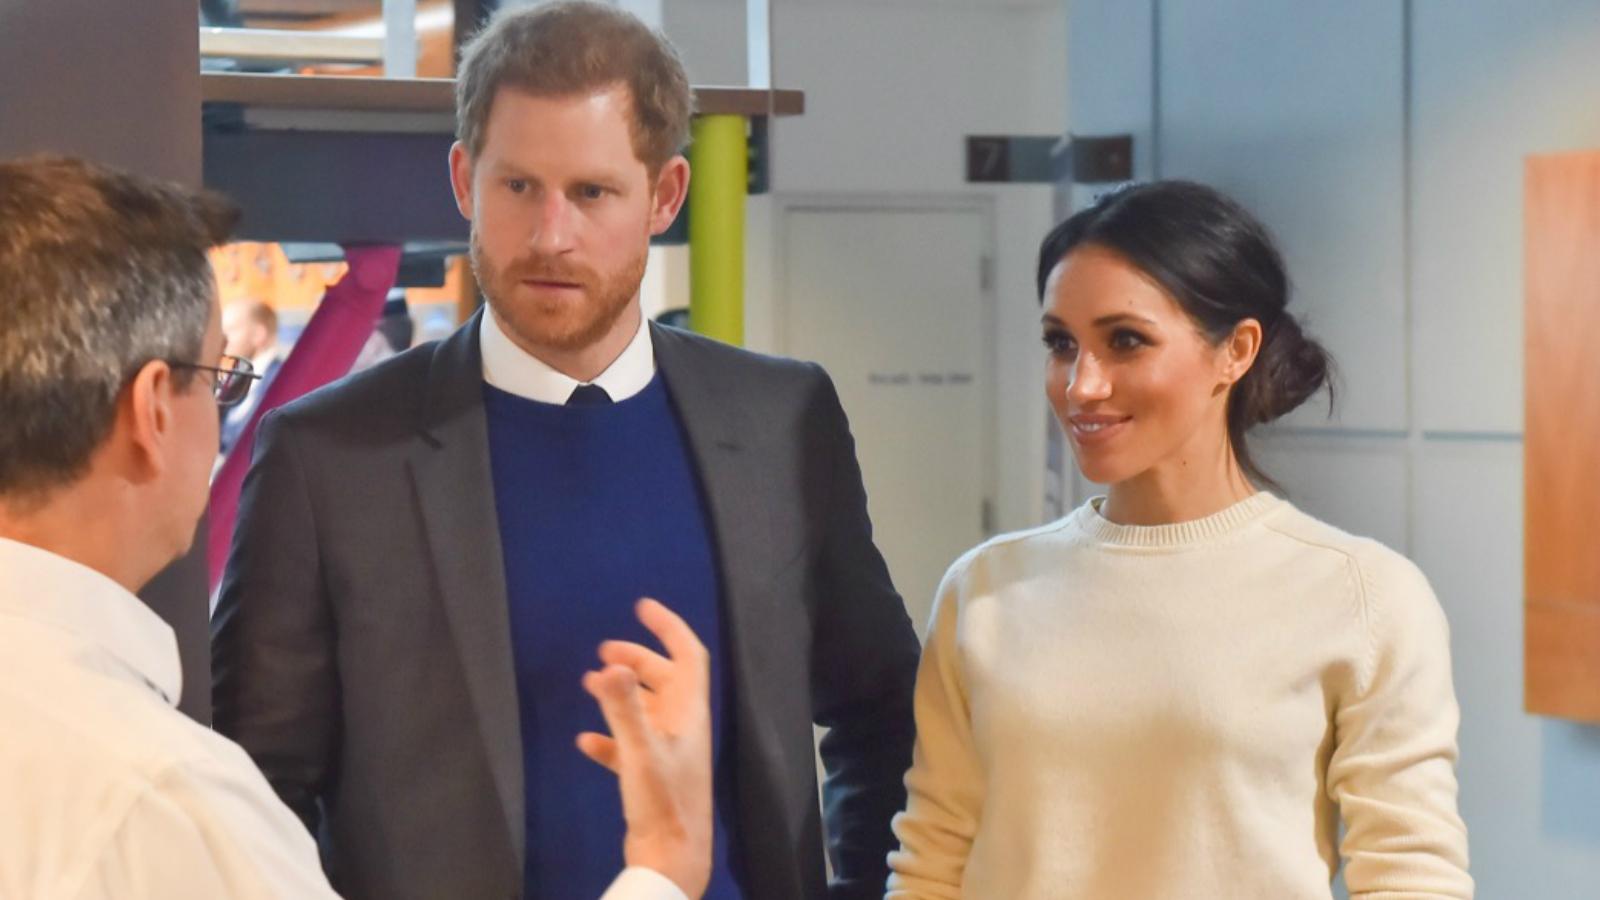 Prince Harry and Meghan Markle talking to a man at a science clinic on a Royal visit